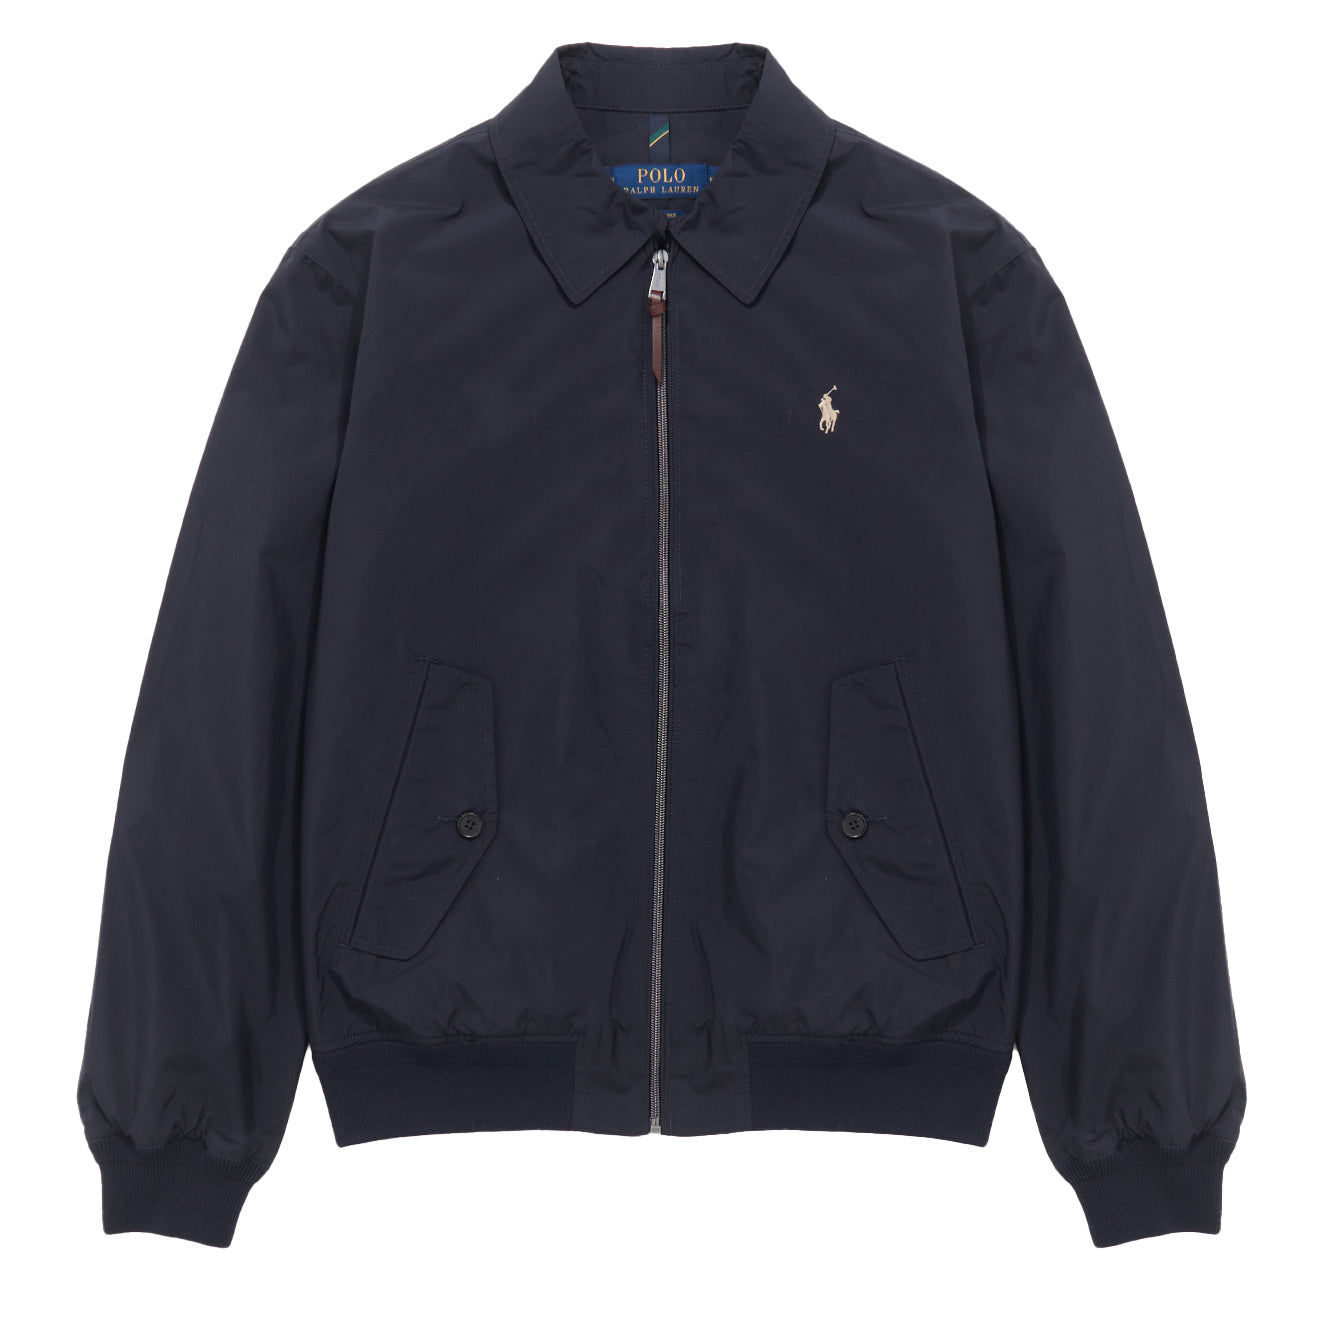 Polo Ralph Lauren Packable Water Resistant Jacket Collection Navy | The ...